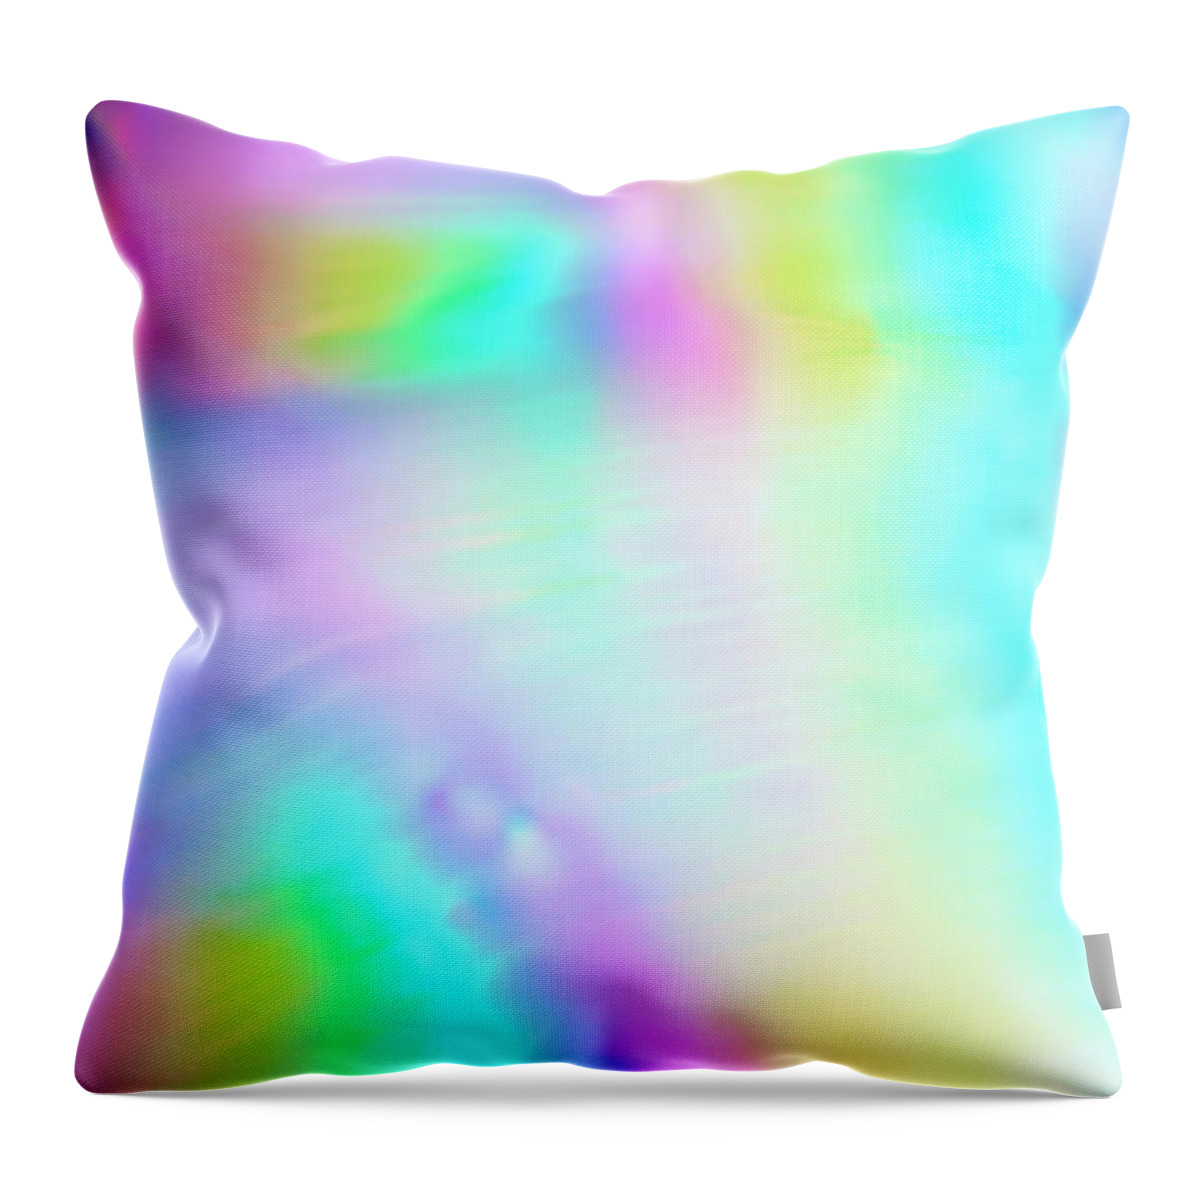 Yellow Throw Pillow featuring the photograph Shiny Multi Colored Background #1 by Level1studio